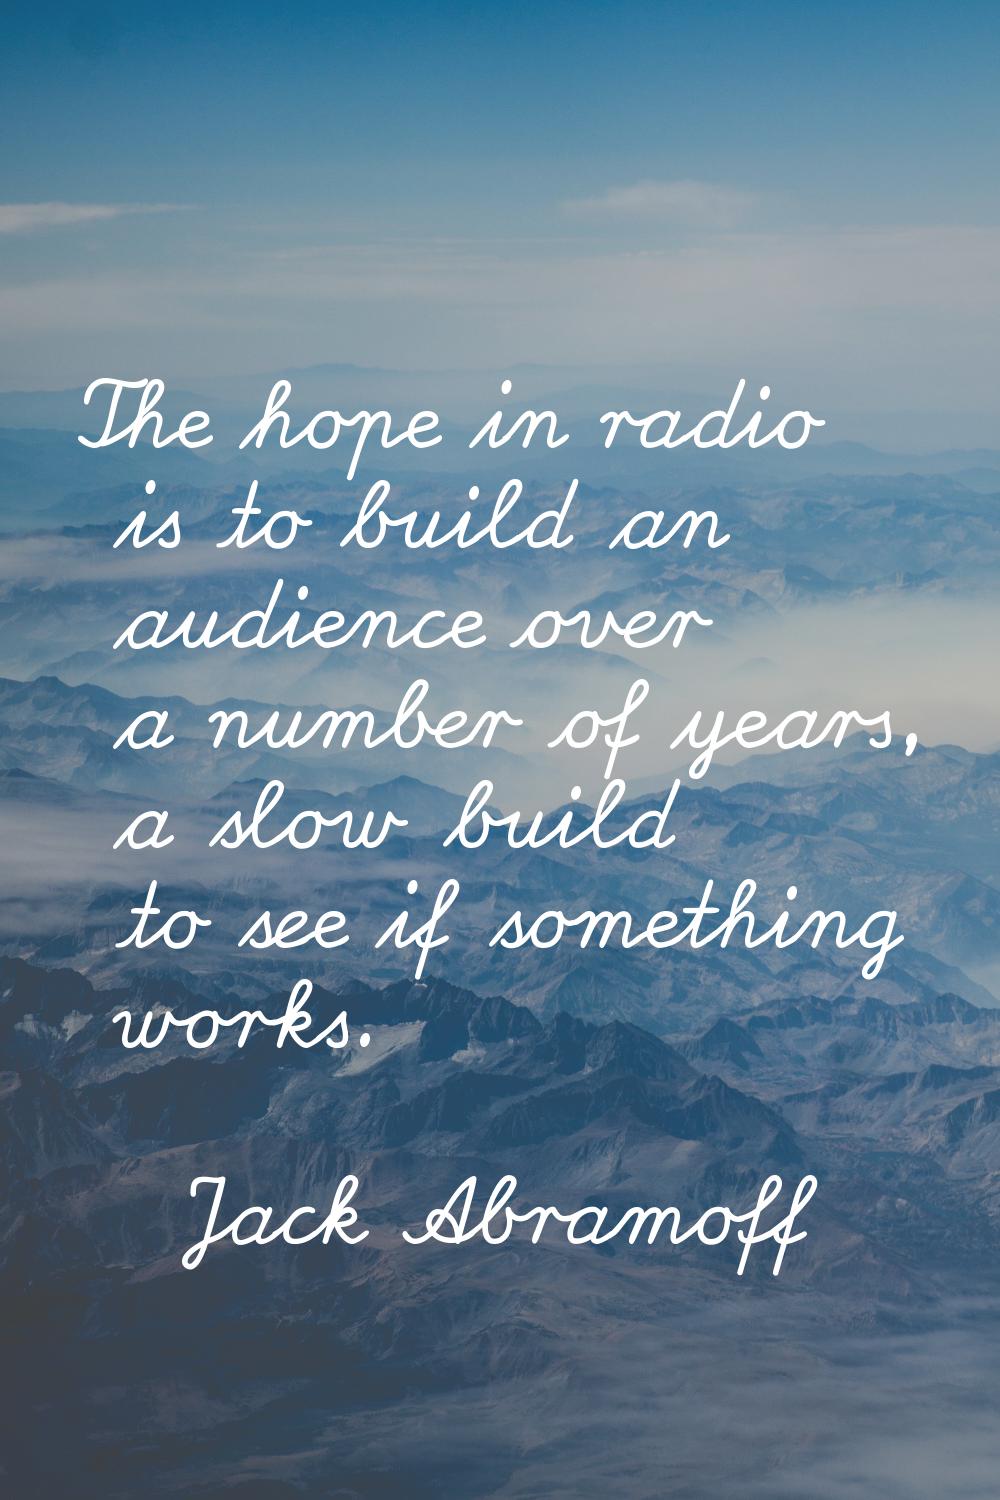 The hope in radio is to build an audience over a number of years, a slow build to see if something 